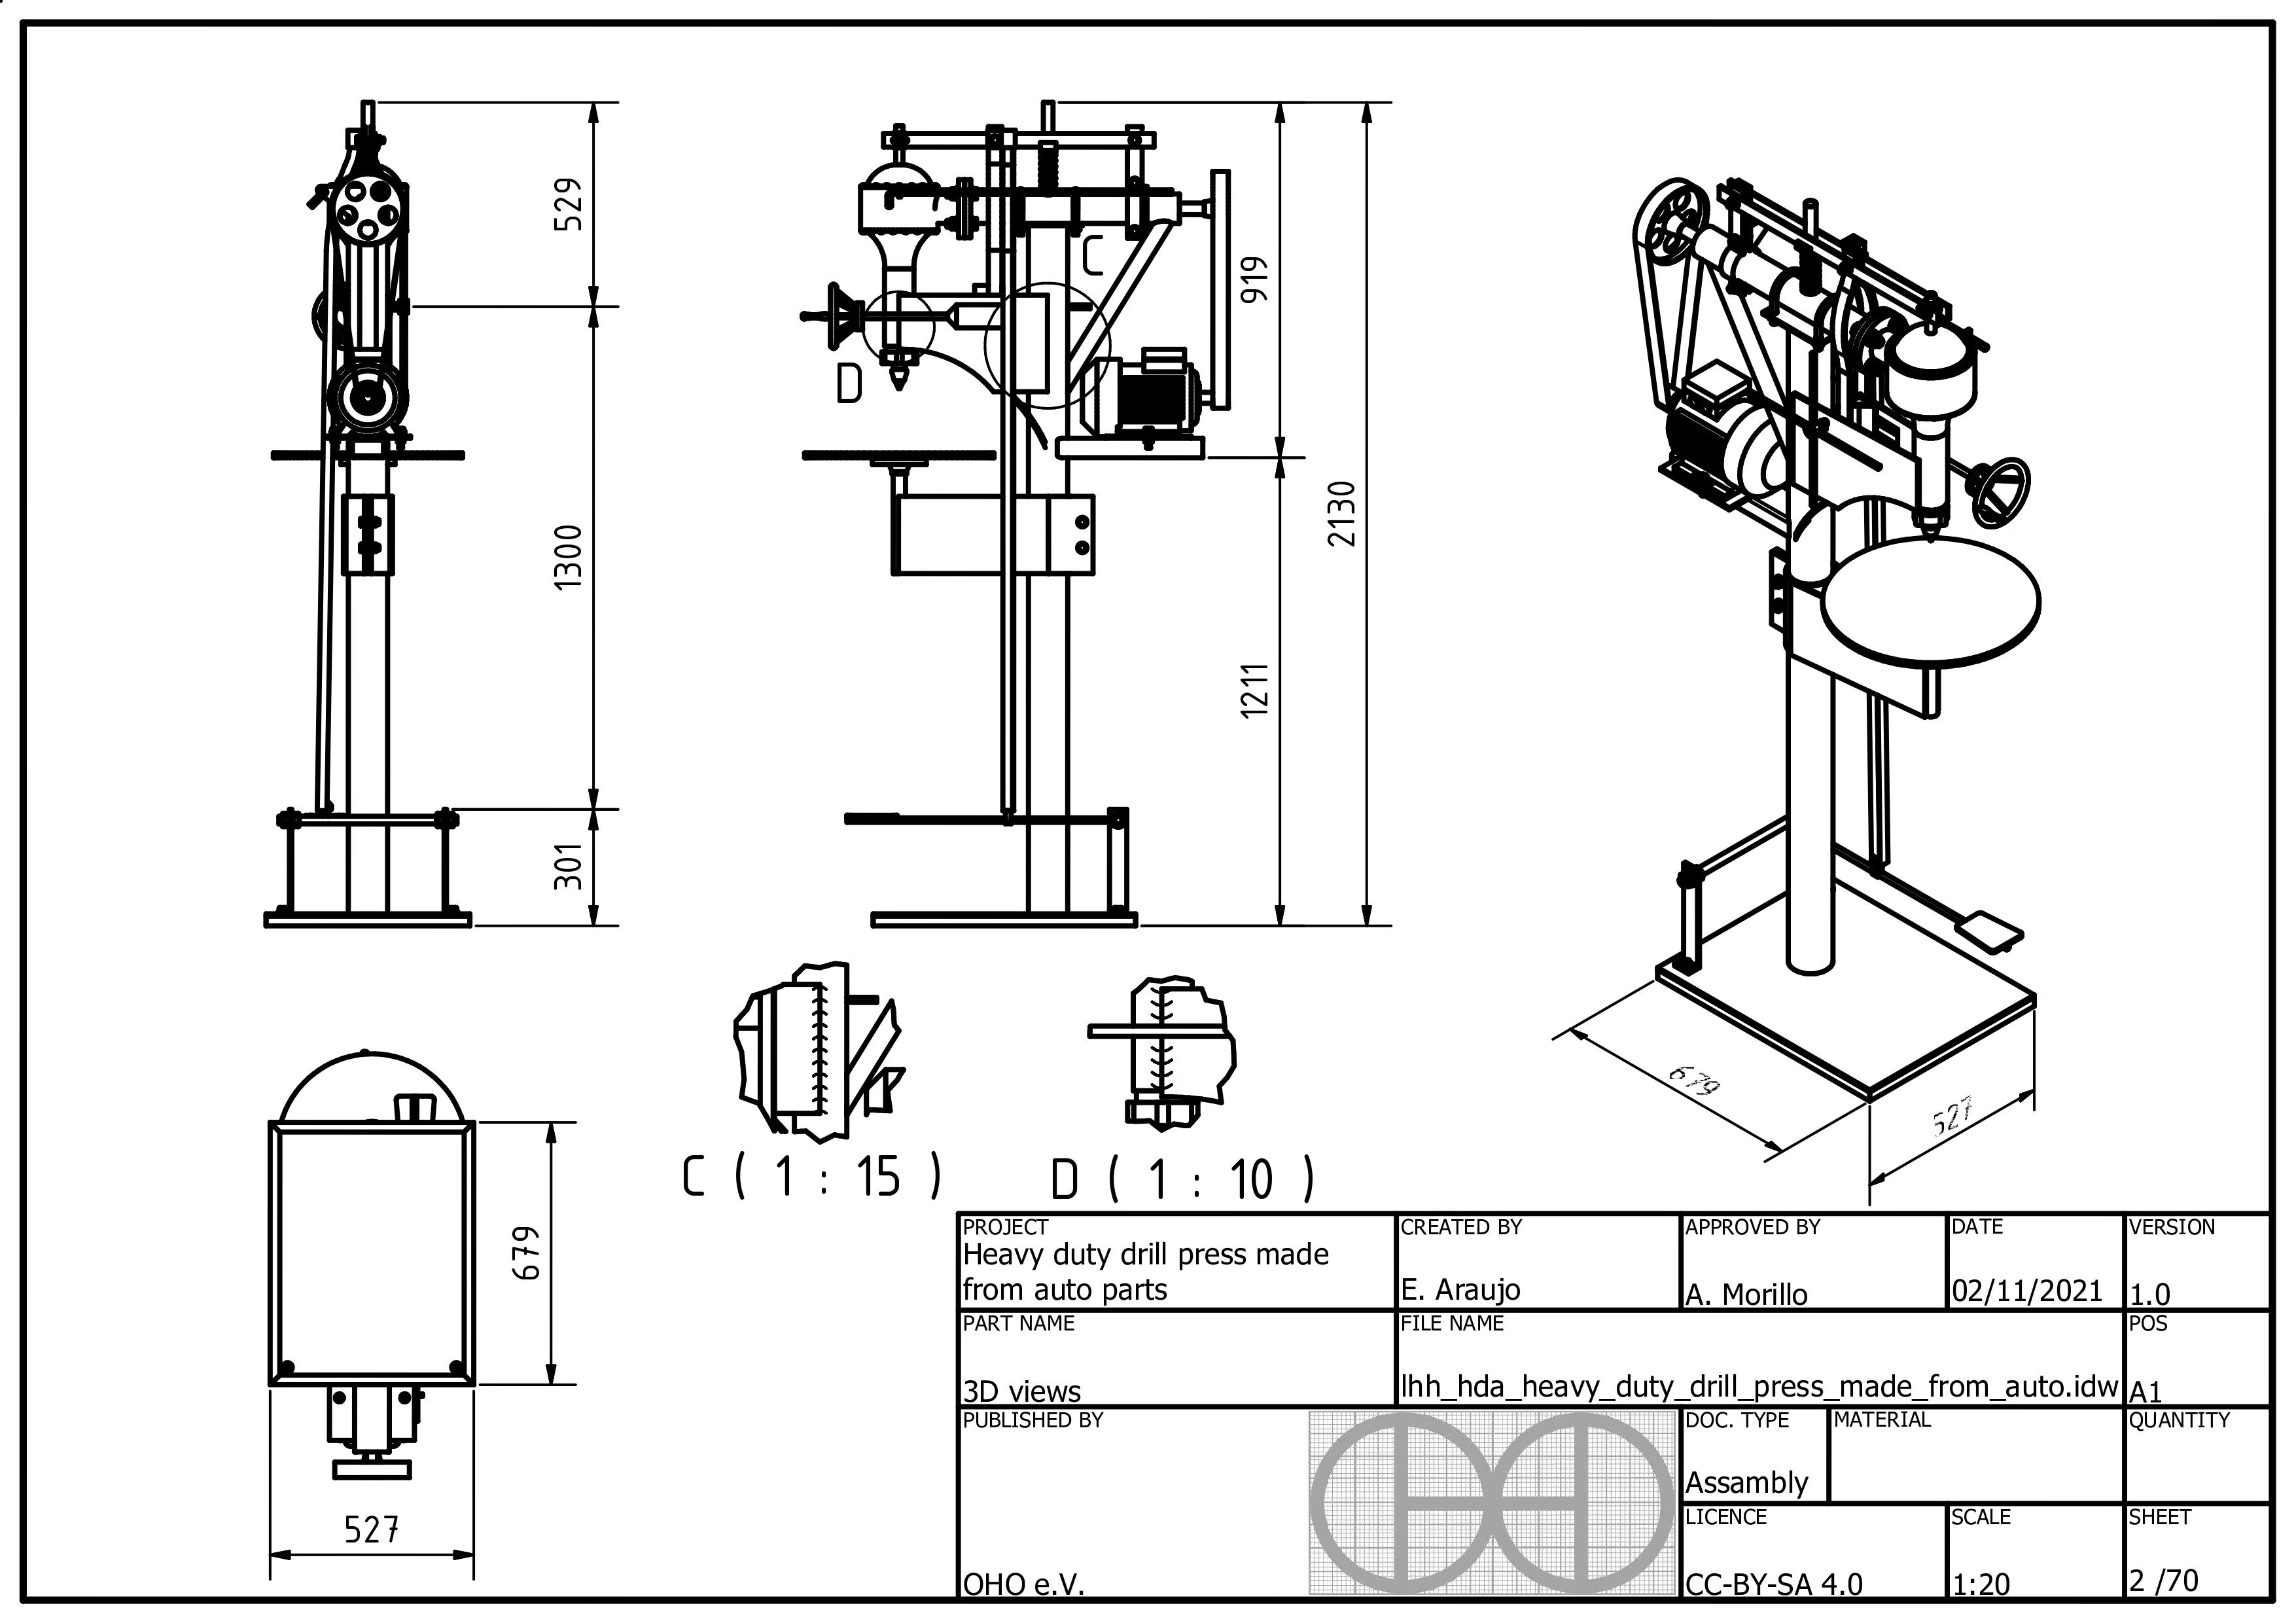 Lhh rdfap radial-drill-made-from-auto-parts 0002.jpg